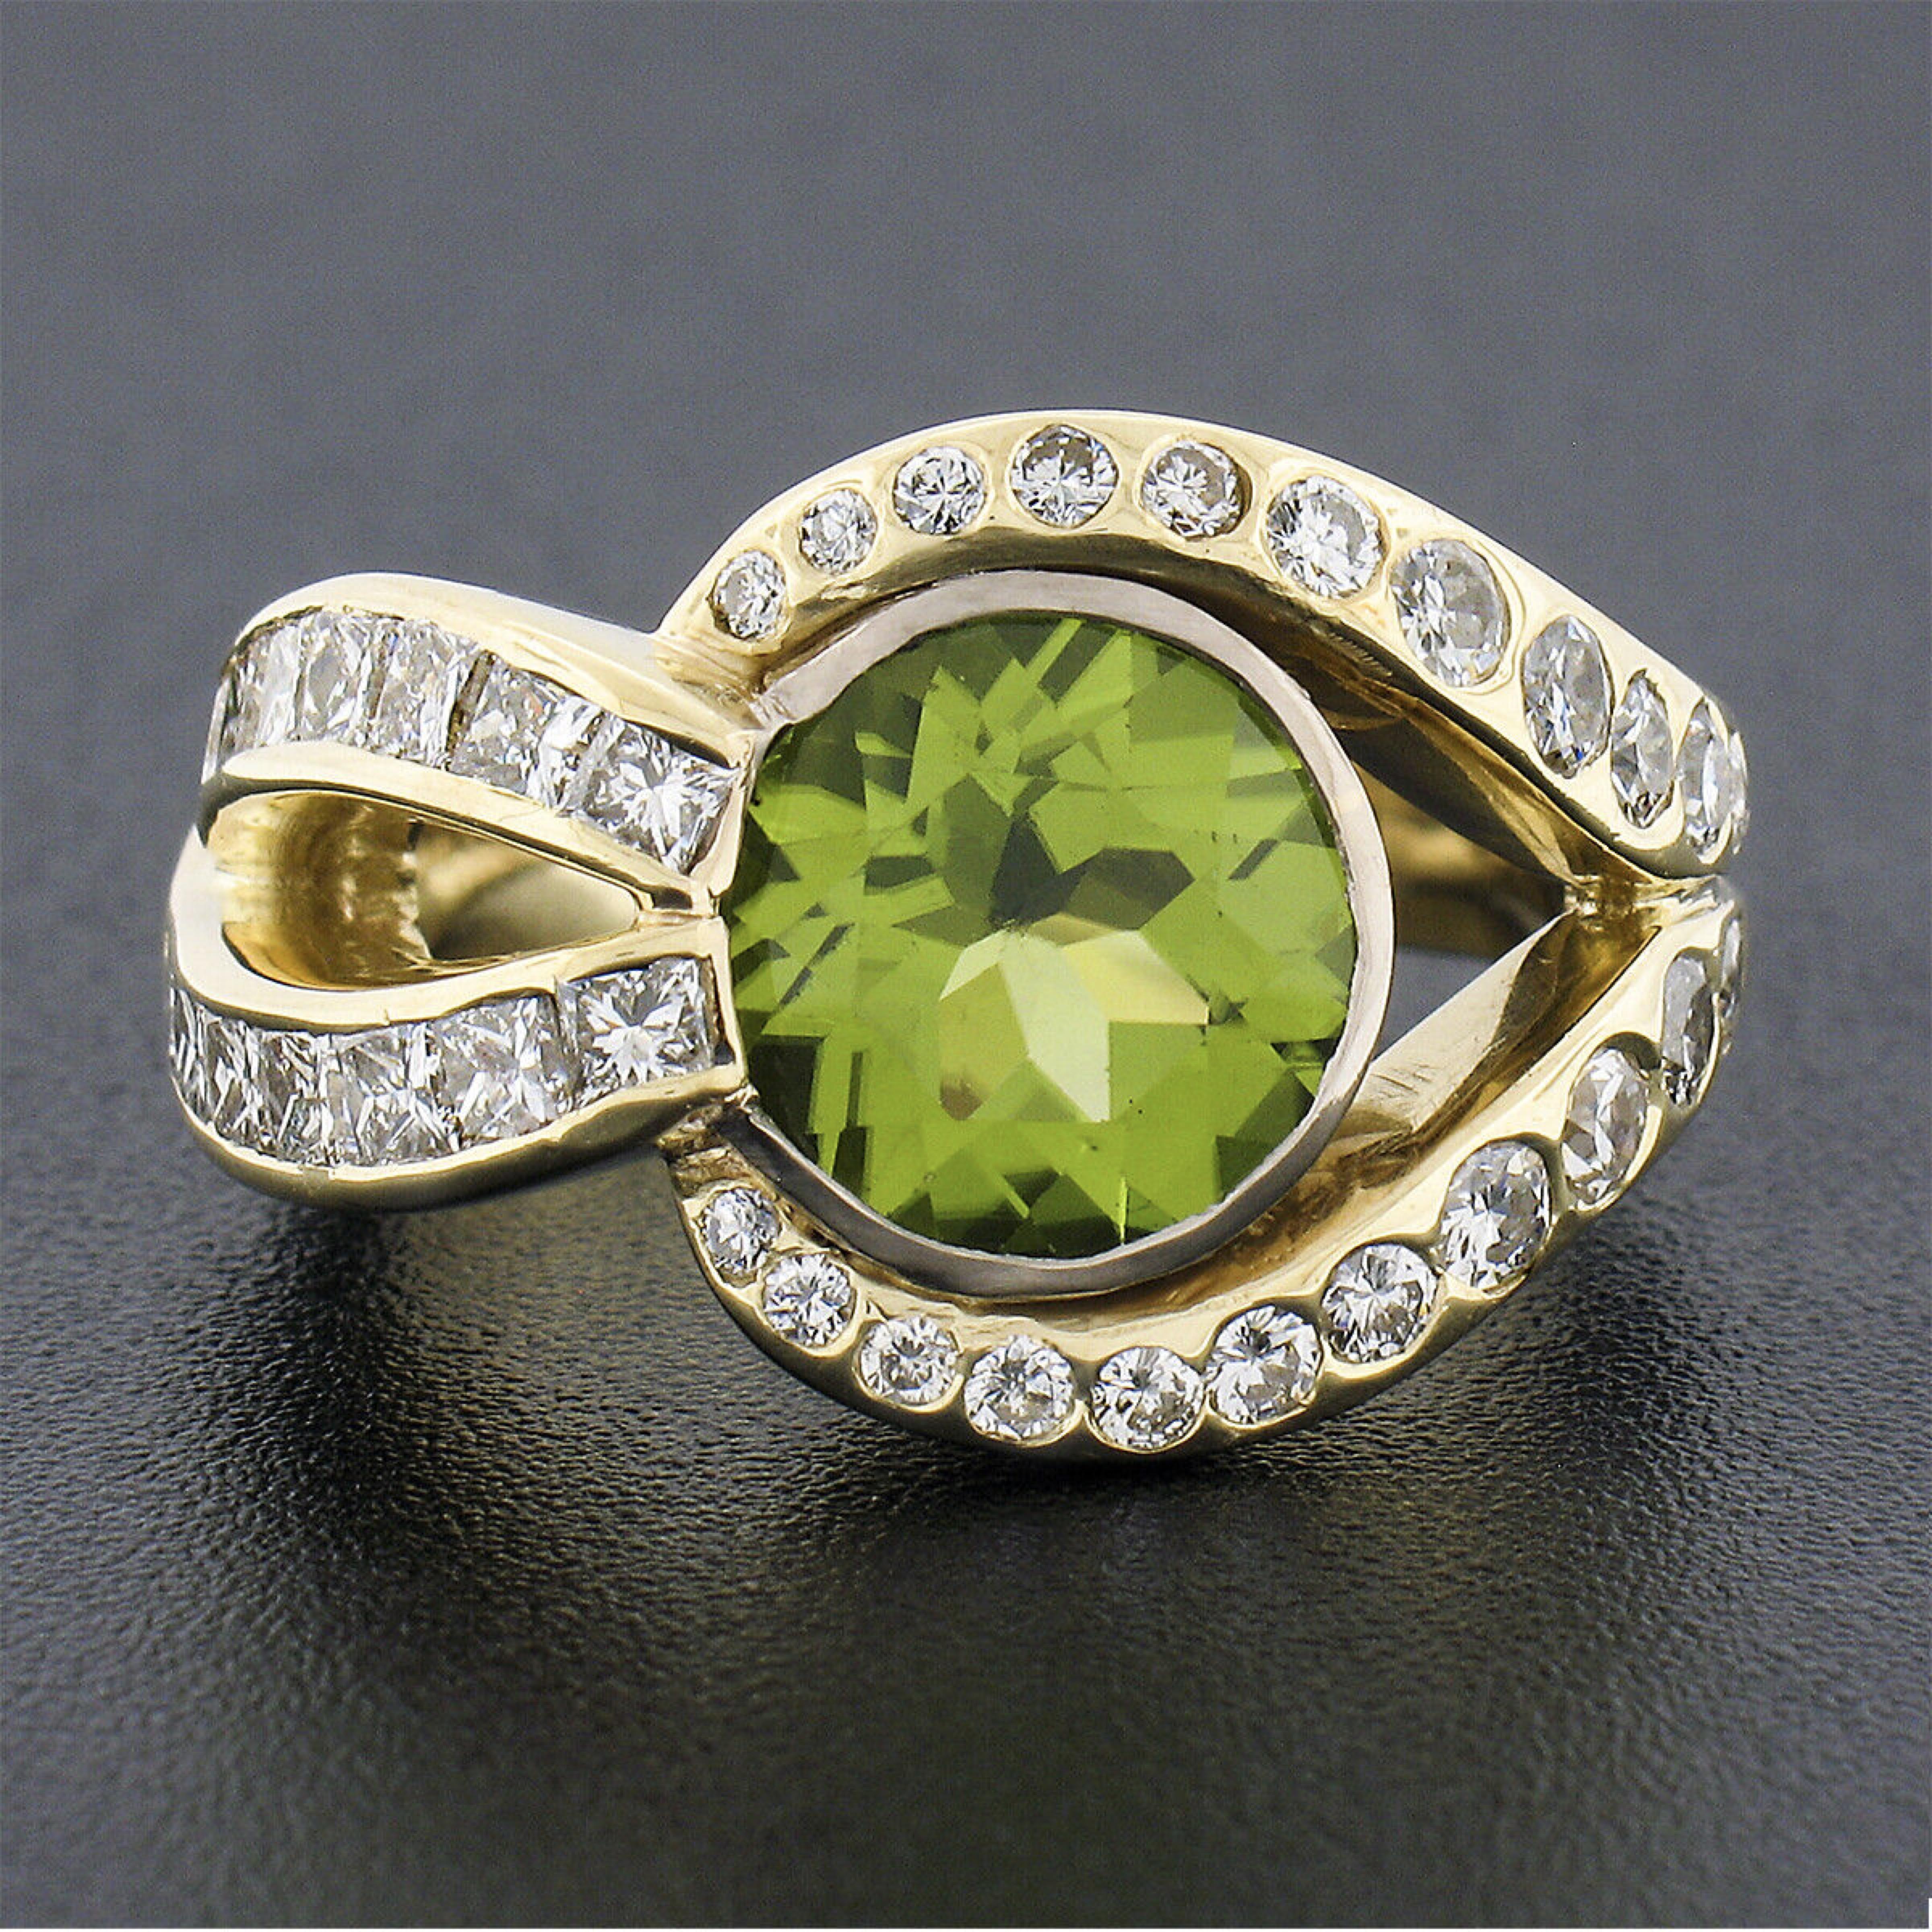 This outstanding and very well made peridot and diamond cocktail ring is crafted in solid 18k yellow gold and features a truly elegant, open, overlapping design set with a very fine quality peridot solitaire and fiery diamond accents throughout. The